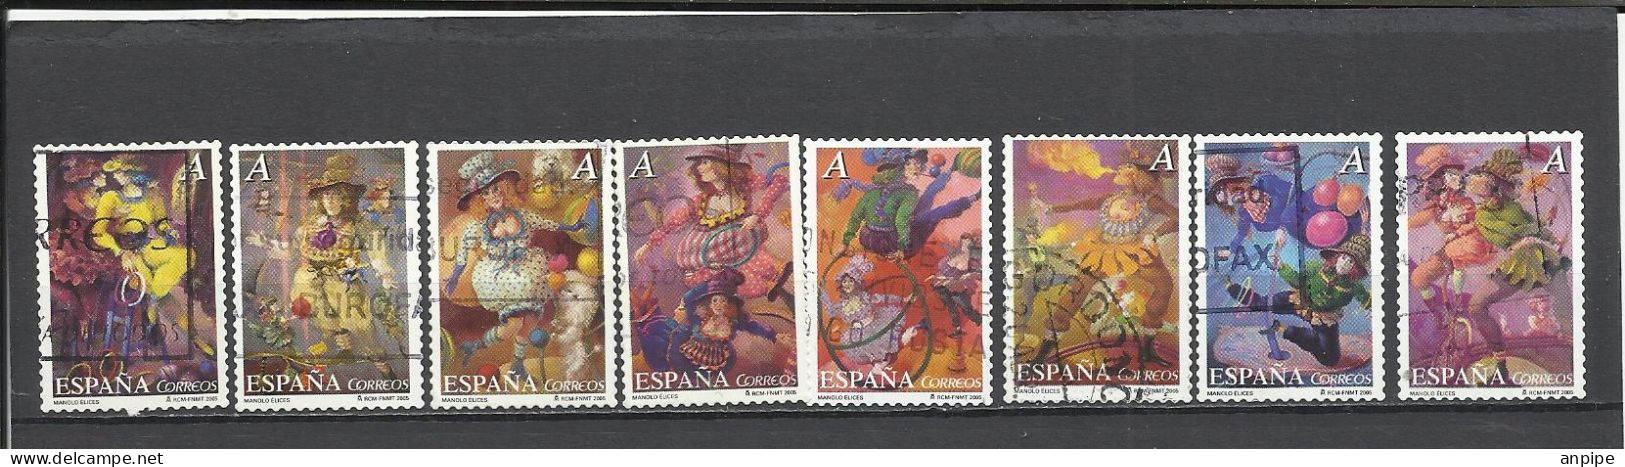 ESPAÑA, 2005 - Used Stamps